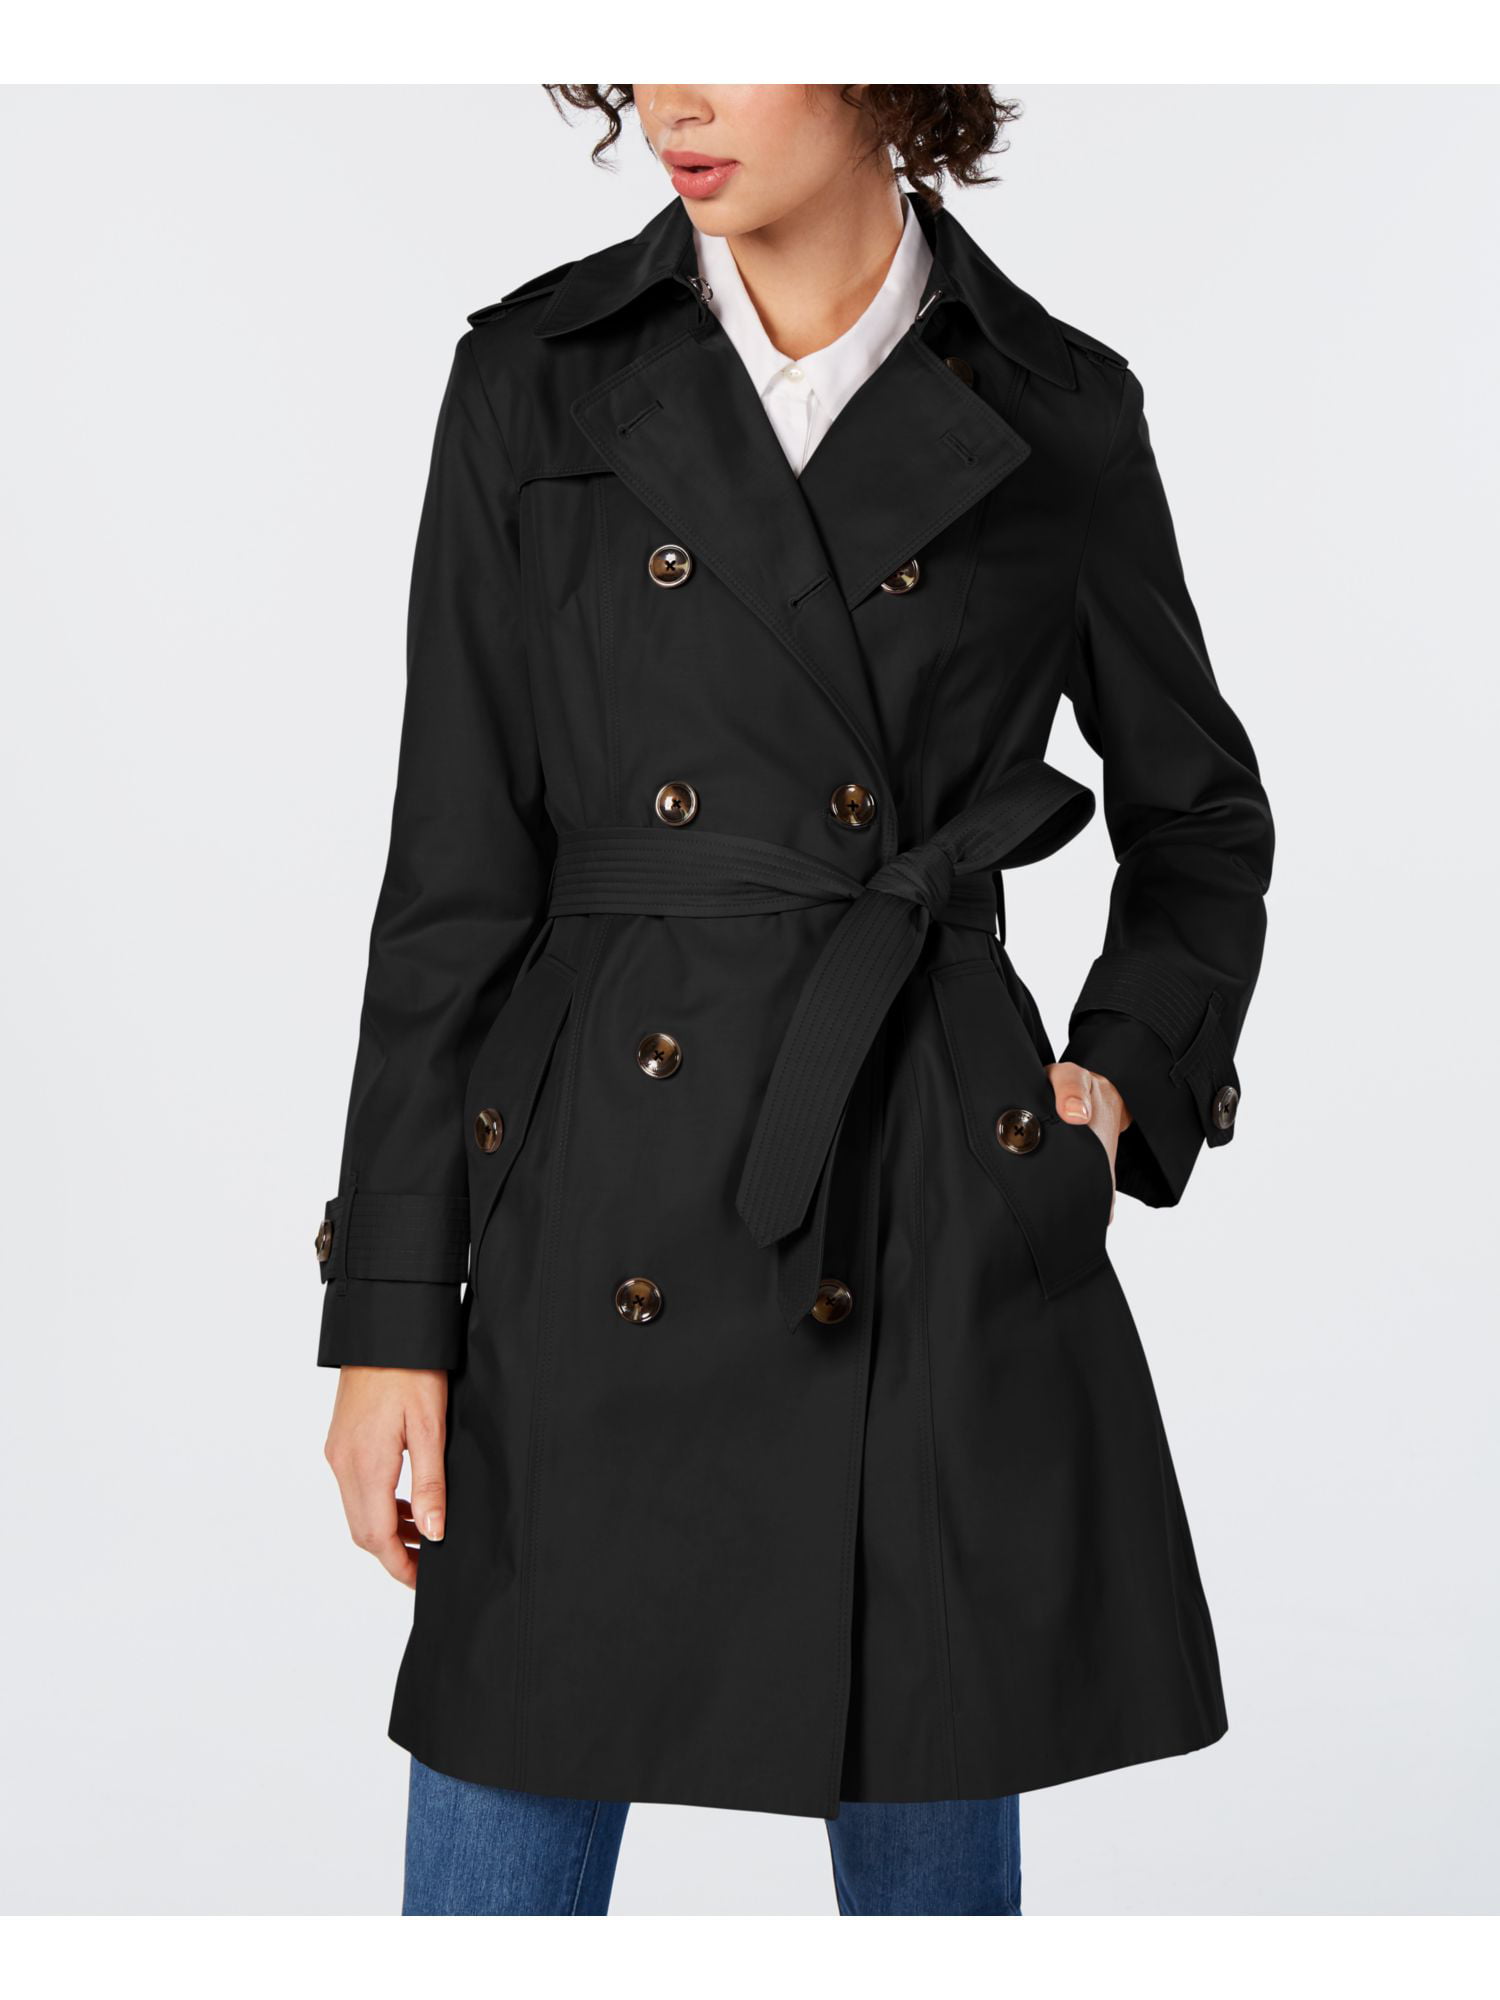 Large XL BRAND NEW WITH TAGS EXPRESS Belted Wool Blend Trench Coat Small